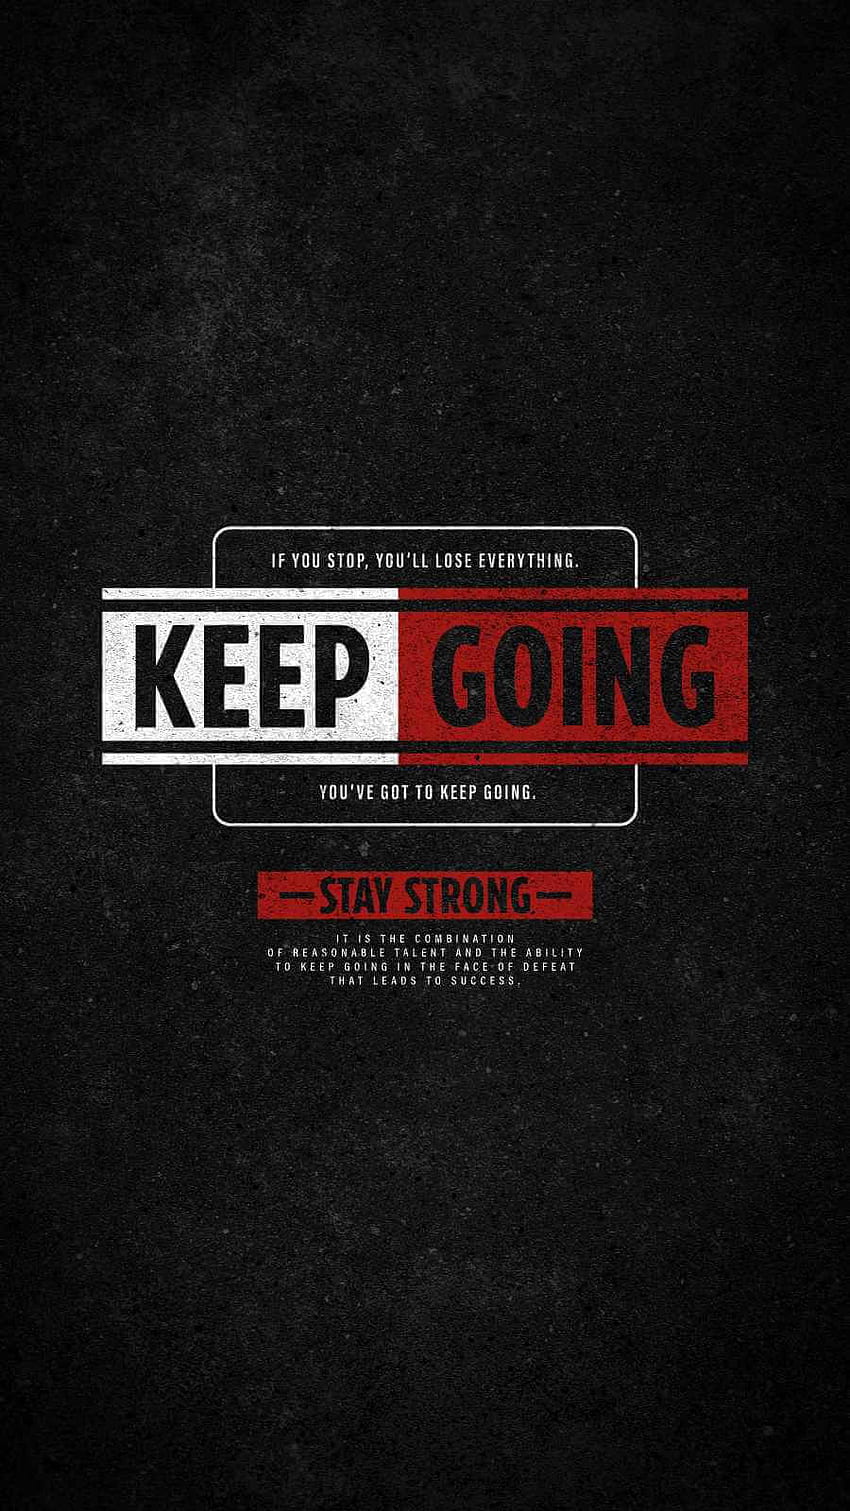 Best Quote Keep Going iPhone - Update, Best iPhone dan iPhone background : Update, Best iPhone dan iPhone background, GOT Quotes wallpaper ponsel HD